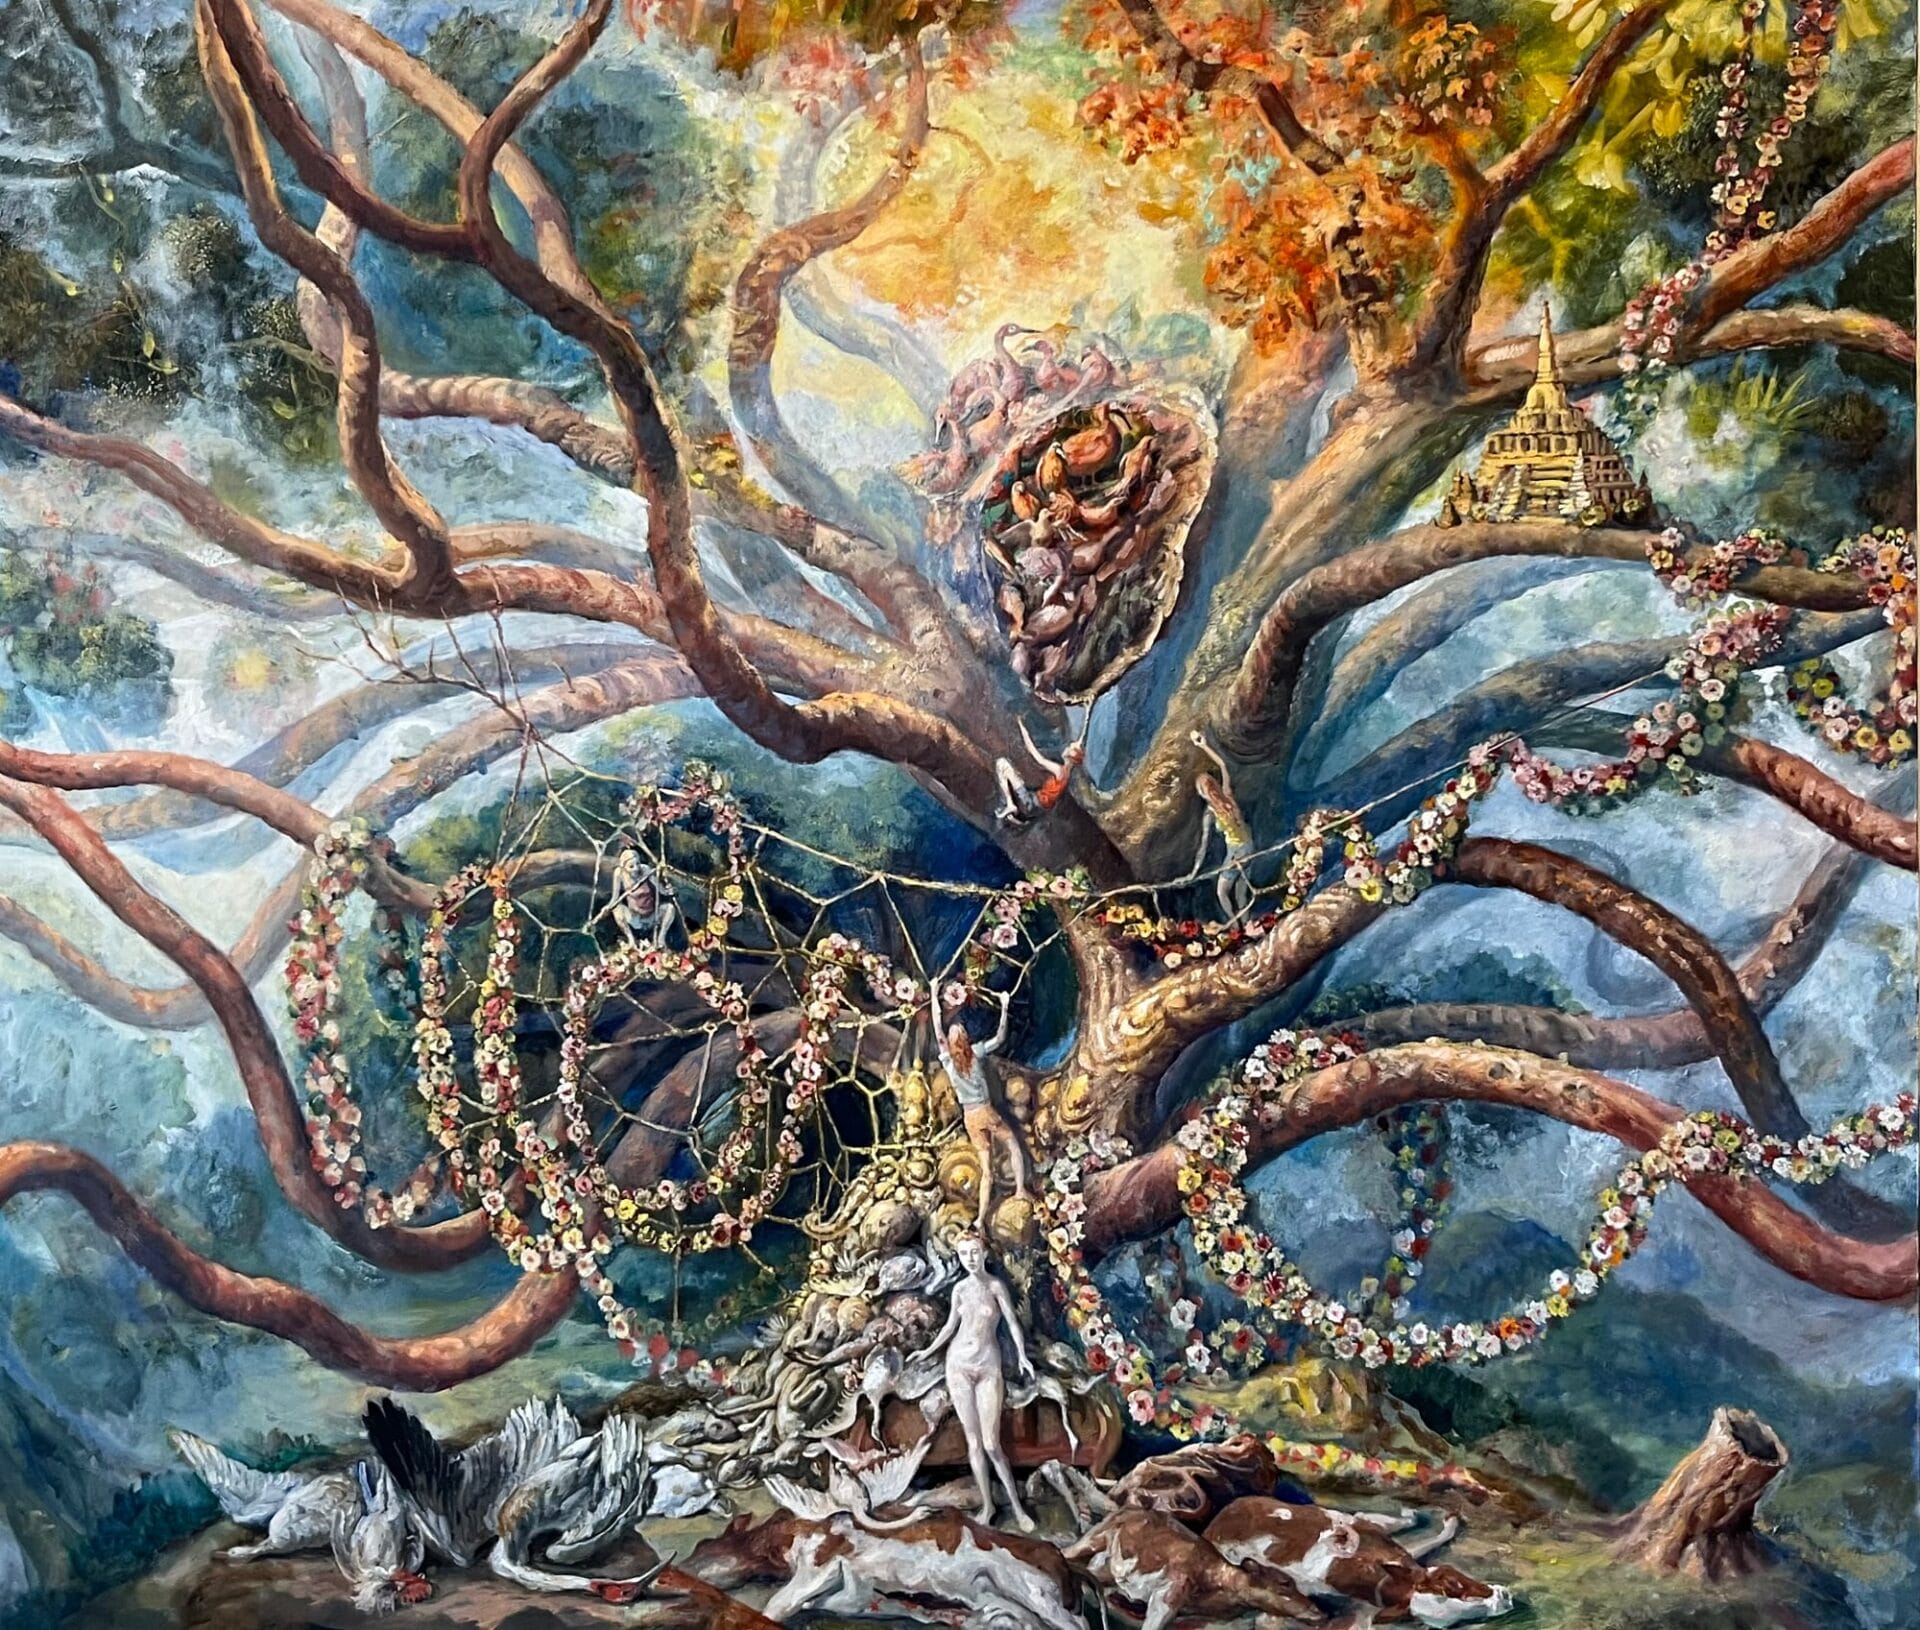 flowers sprawl across a tree with a person standing in the foreground above dead animals